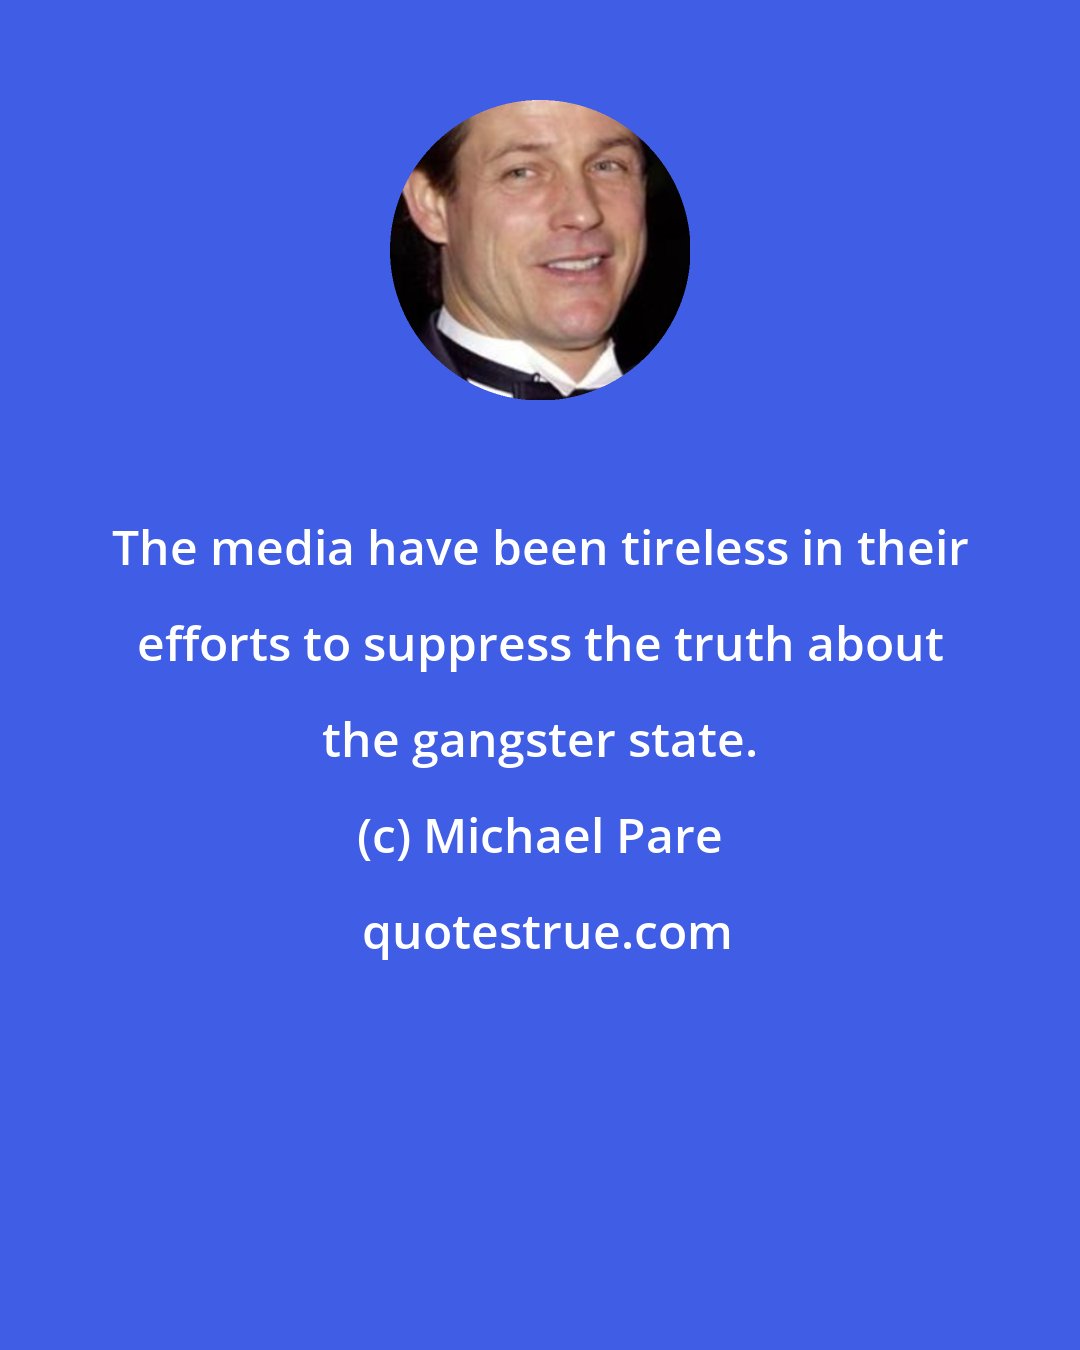 Michael Pare: The media have been tireless in their efforts to suppress the truth about the gangster state.